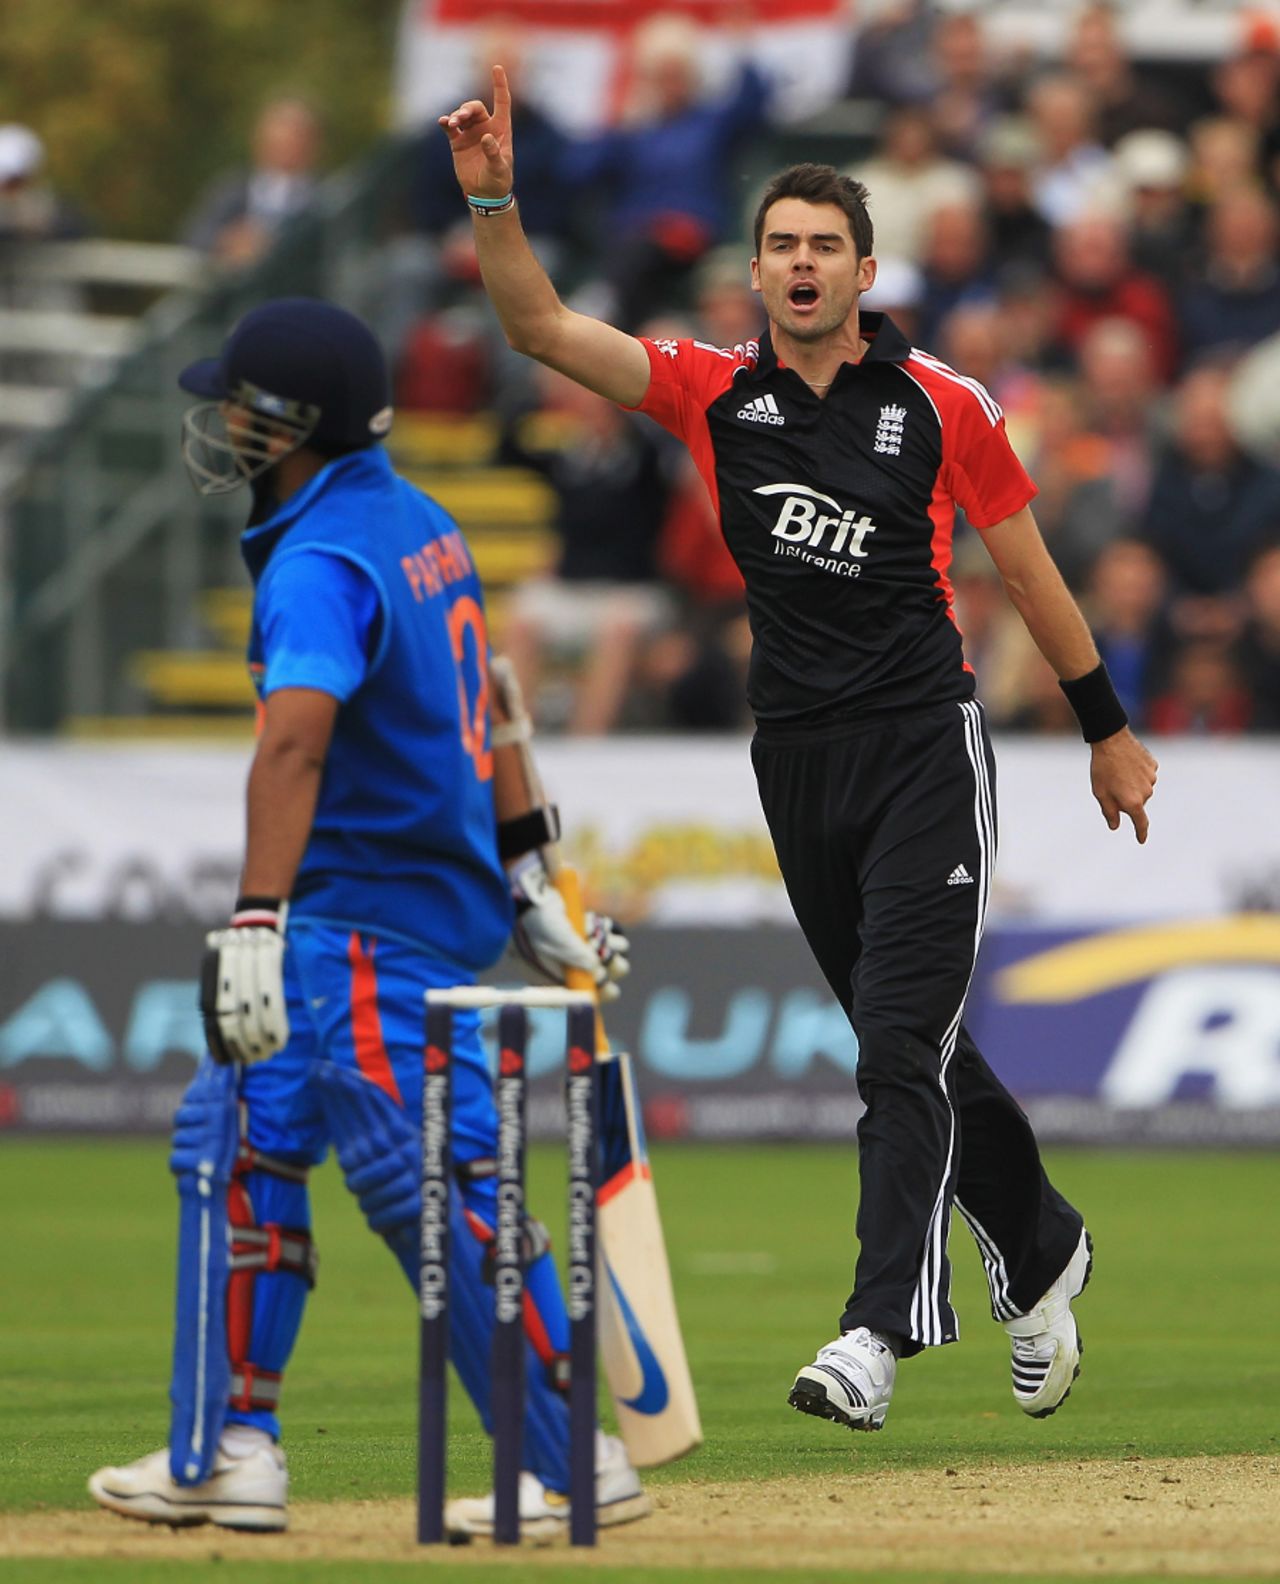 James Anderson had Parthiv Patel caught behind, England v India, 1st ODI, Chester-le-Street, September 3, 2011